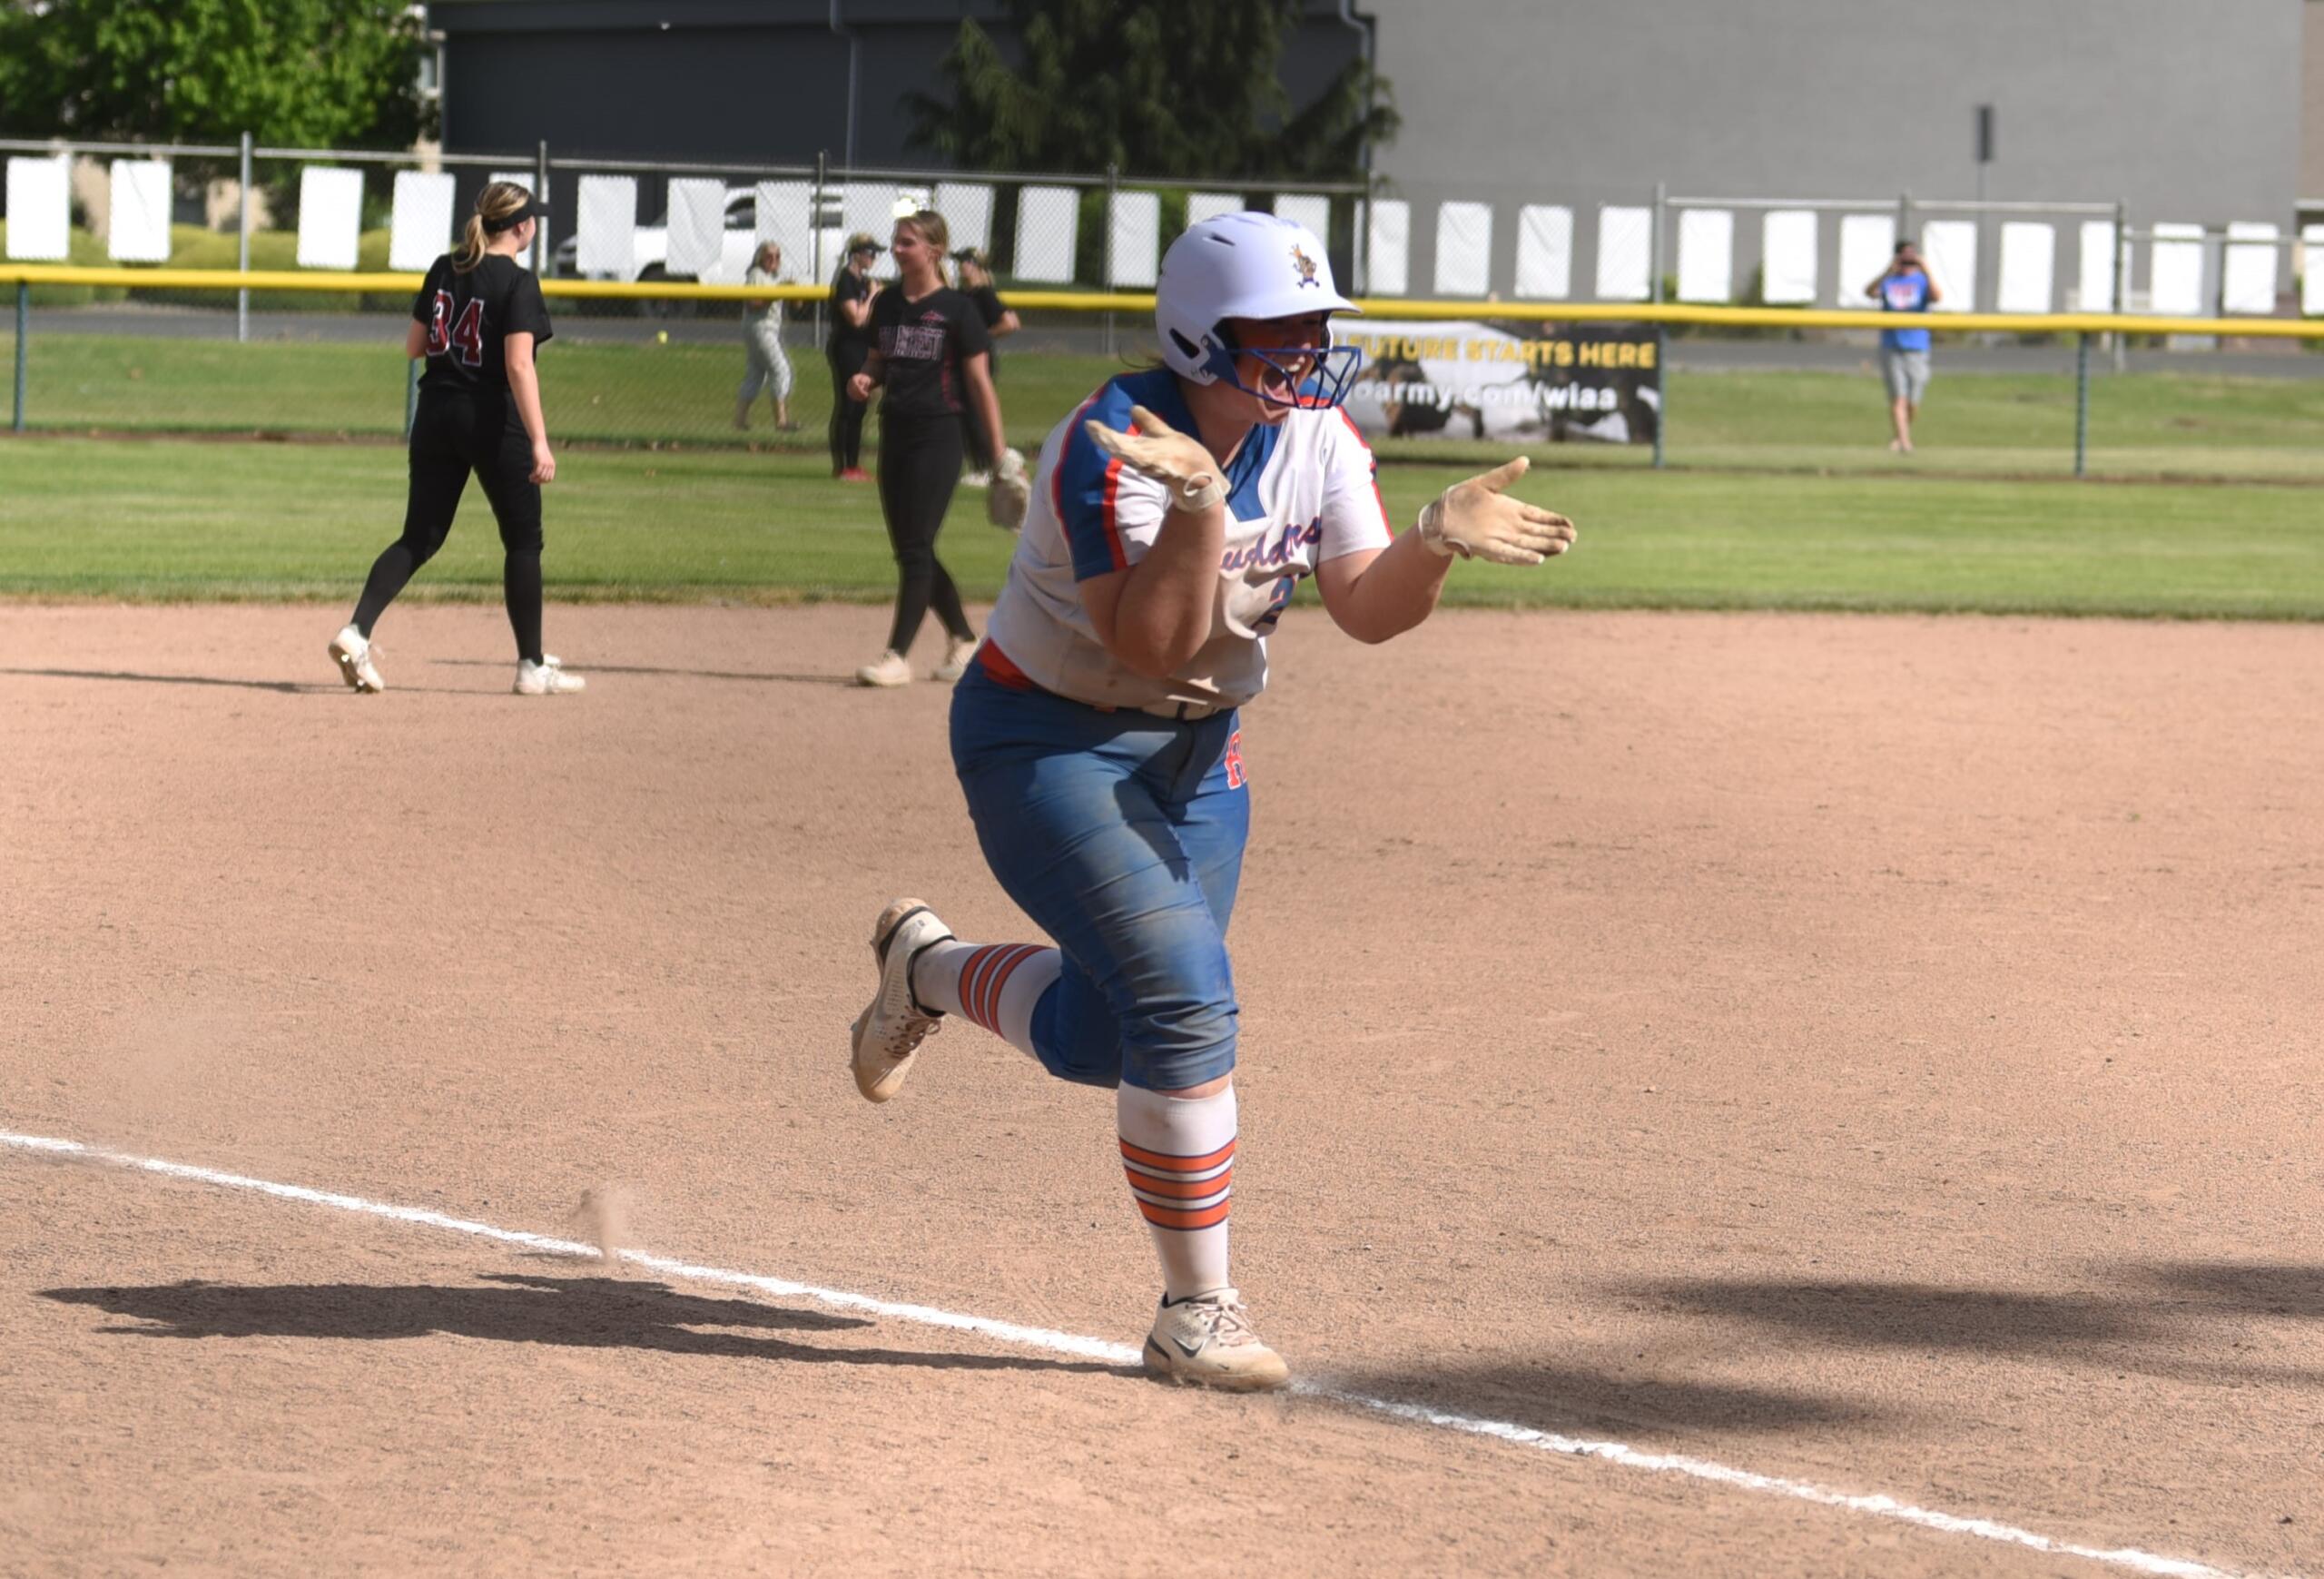 Ridgefield's Maizy Whitlow celebrates her grand slam as she approaches home plate in the third inning of a 21-3 win over Cedarcrest in the quarterfinals of the 2A state softball tournament Friday in Selah.